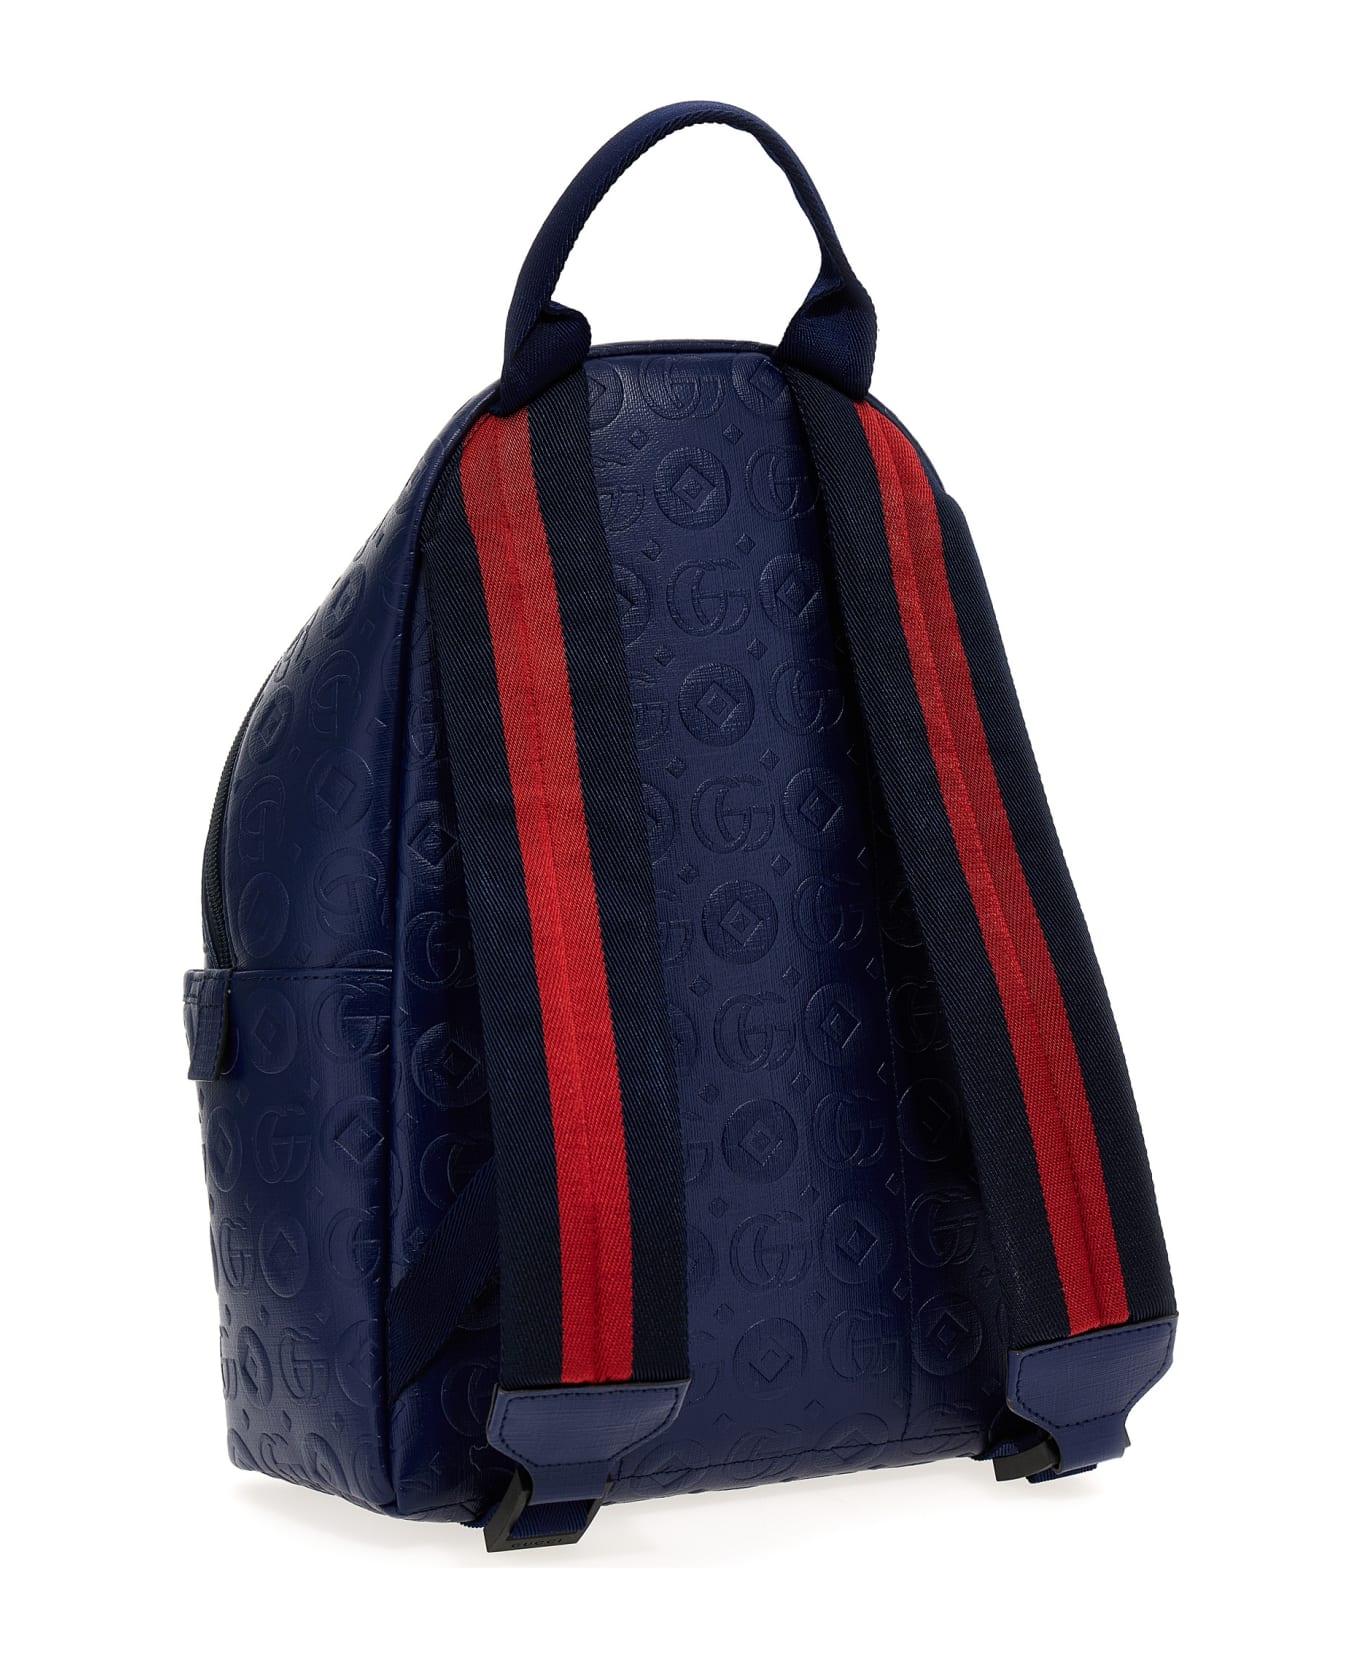 Gucci 'double G' Backpack - NAVY アクセサリー＆ギフト